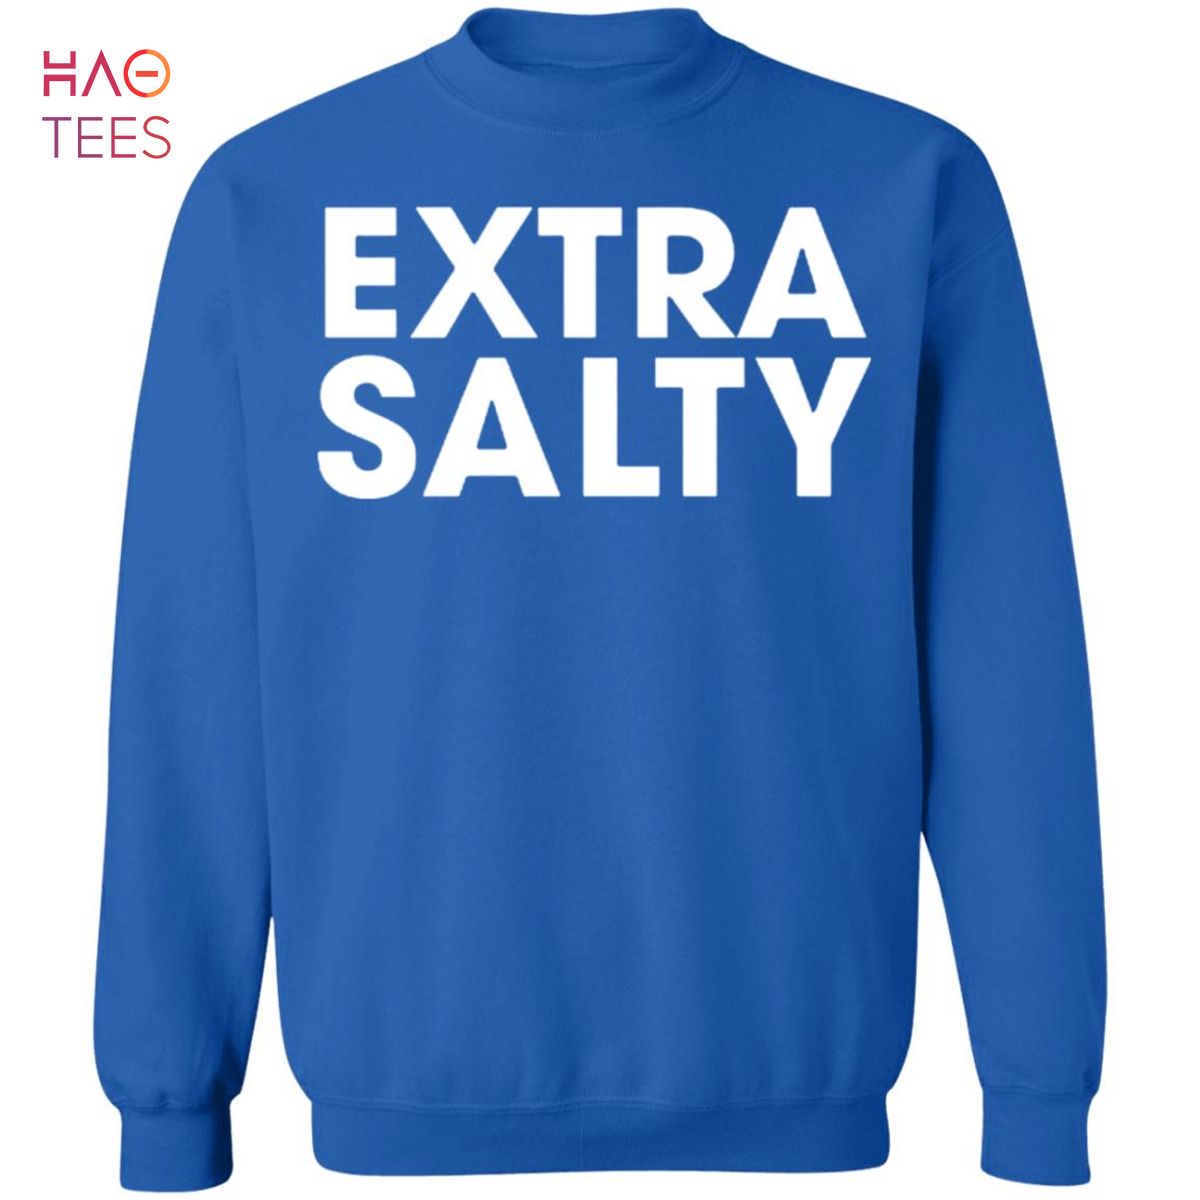 HOT Extra Salty Sweater